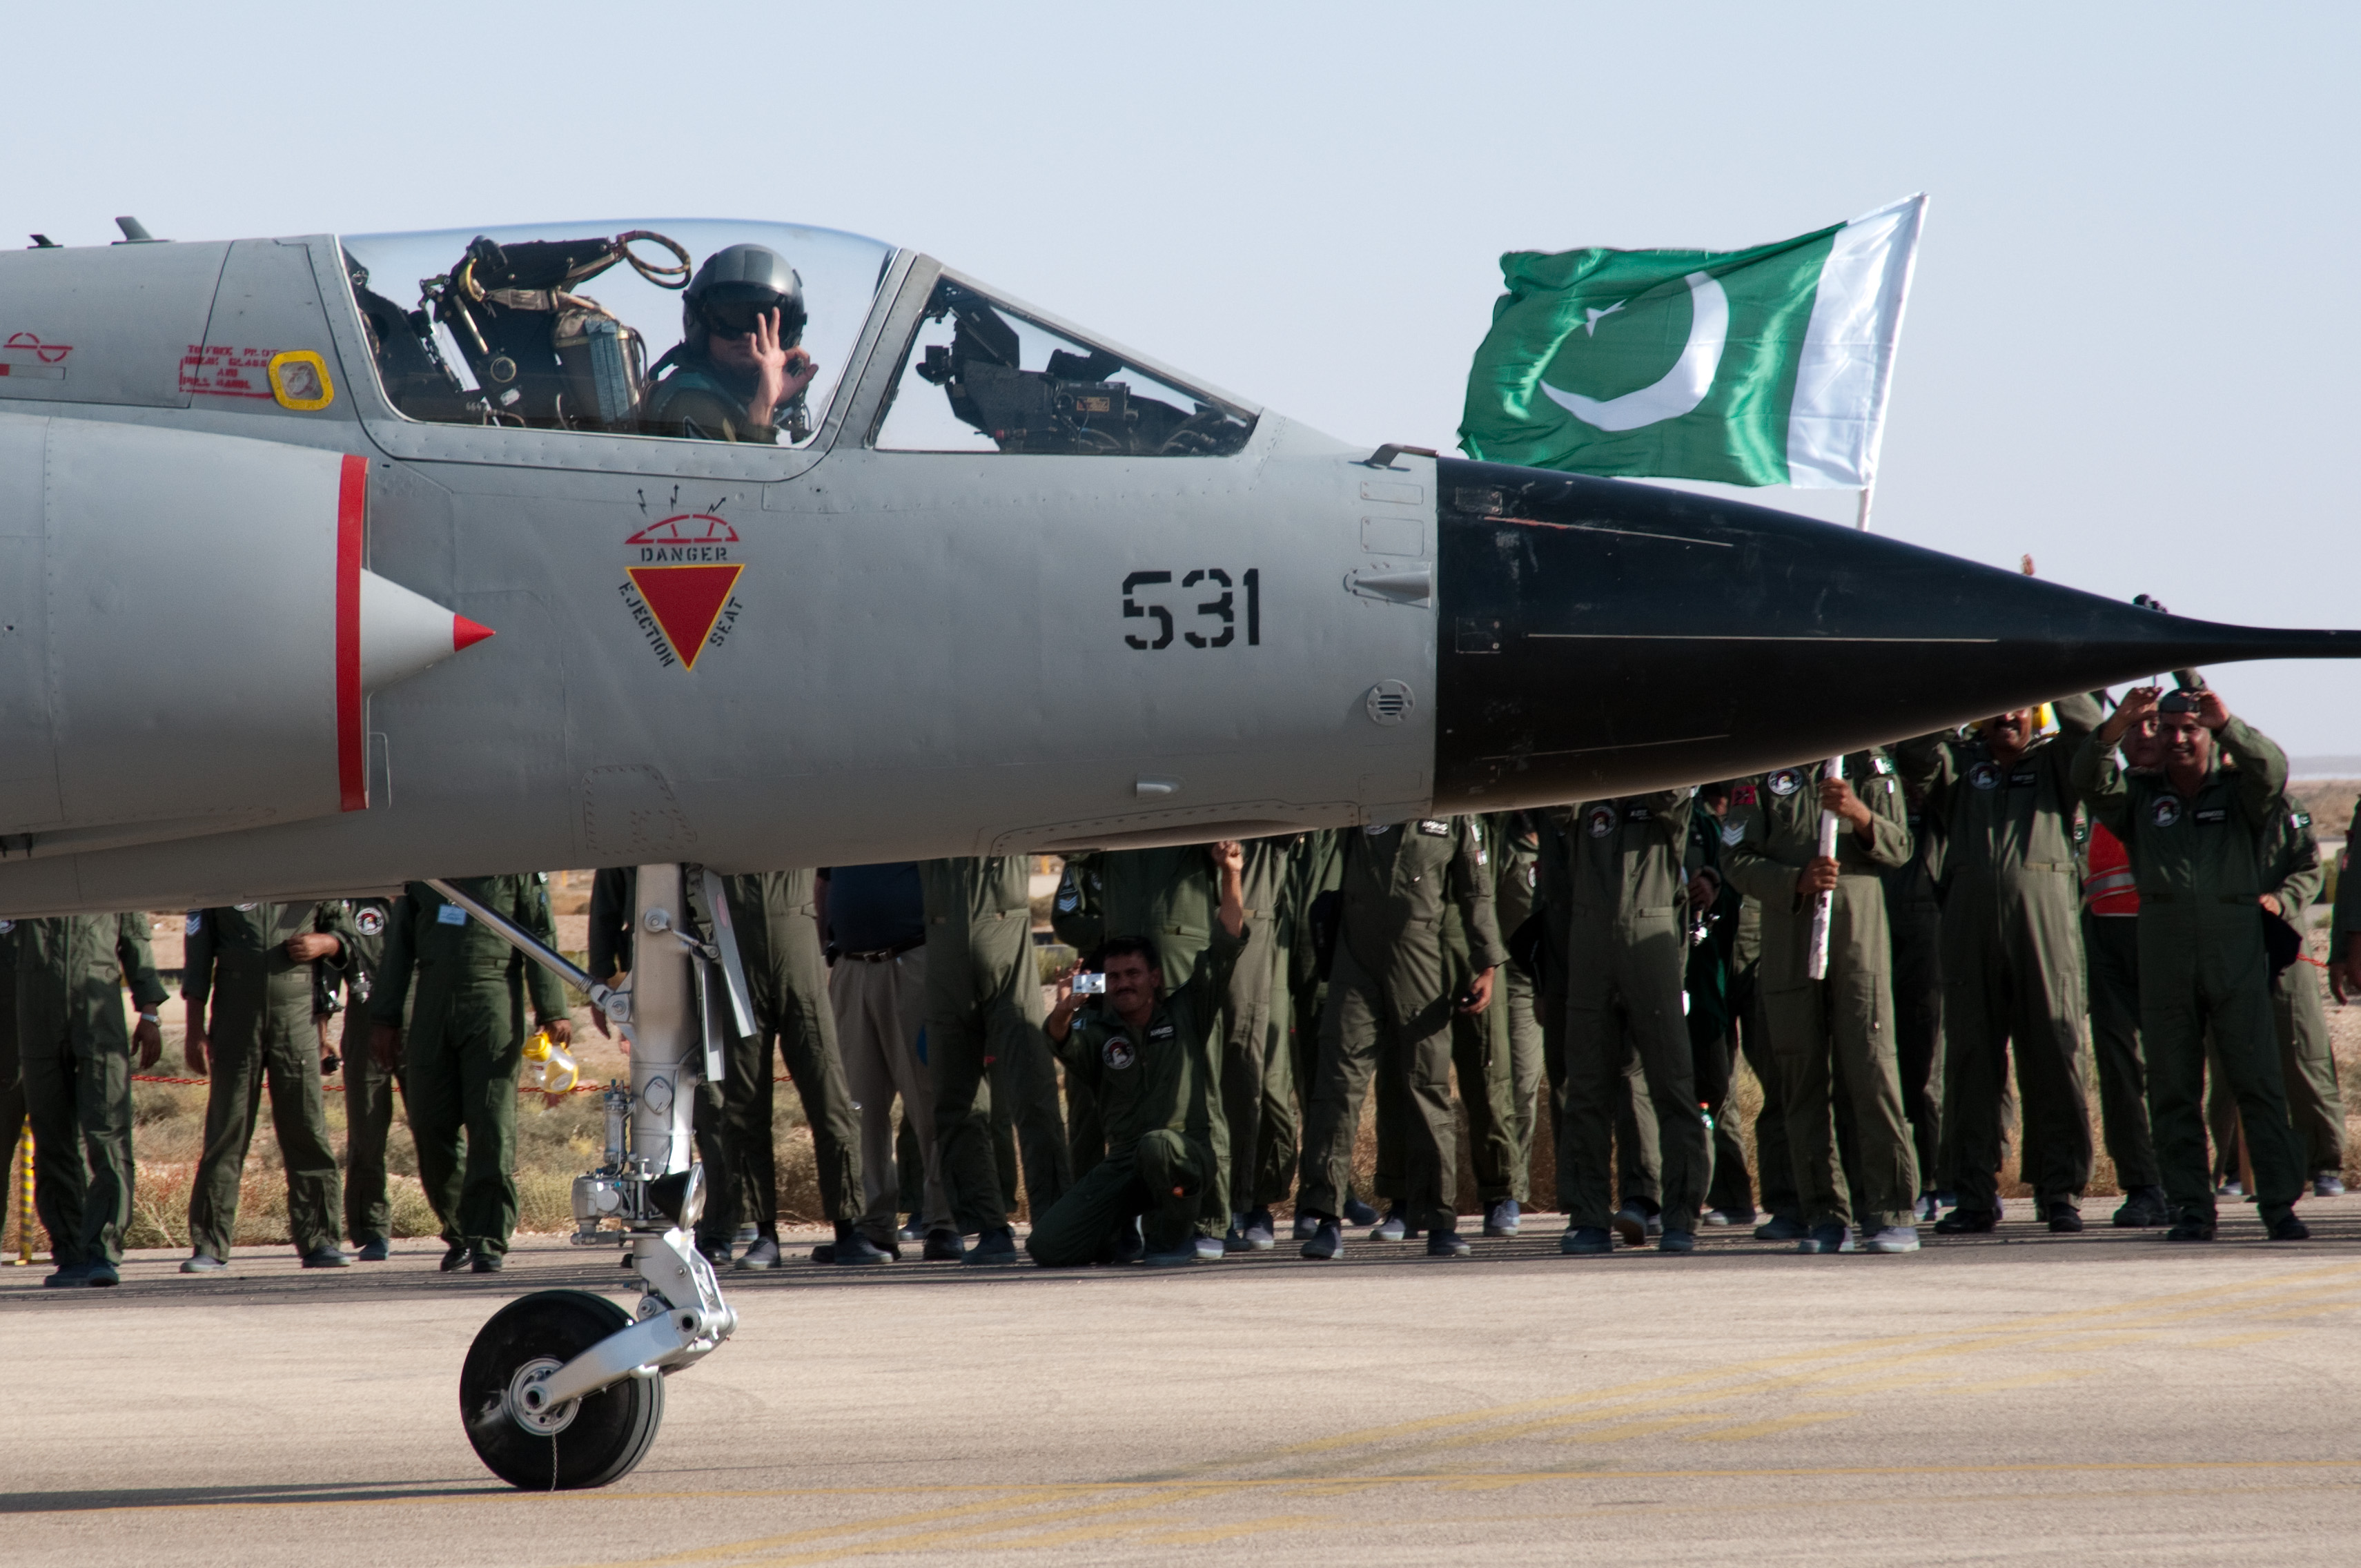 PAF_Mirage_III_ROSE_alert_scramble_competition_Falcon_Air_Meet_2010_side_view_2.jpg